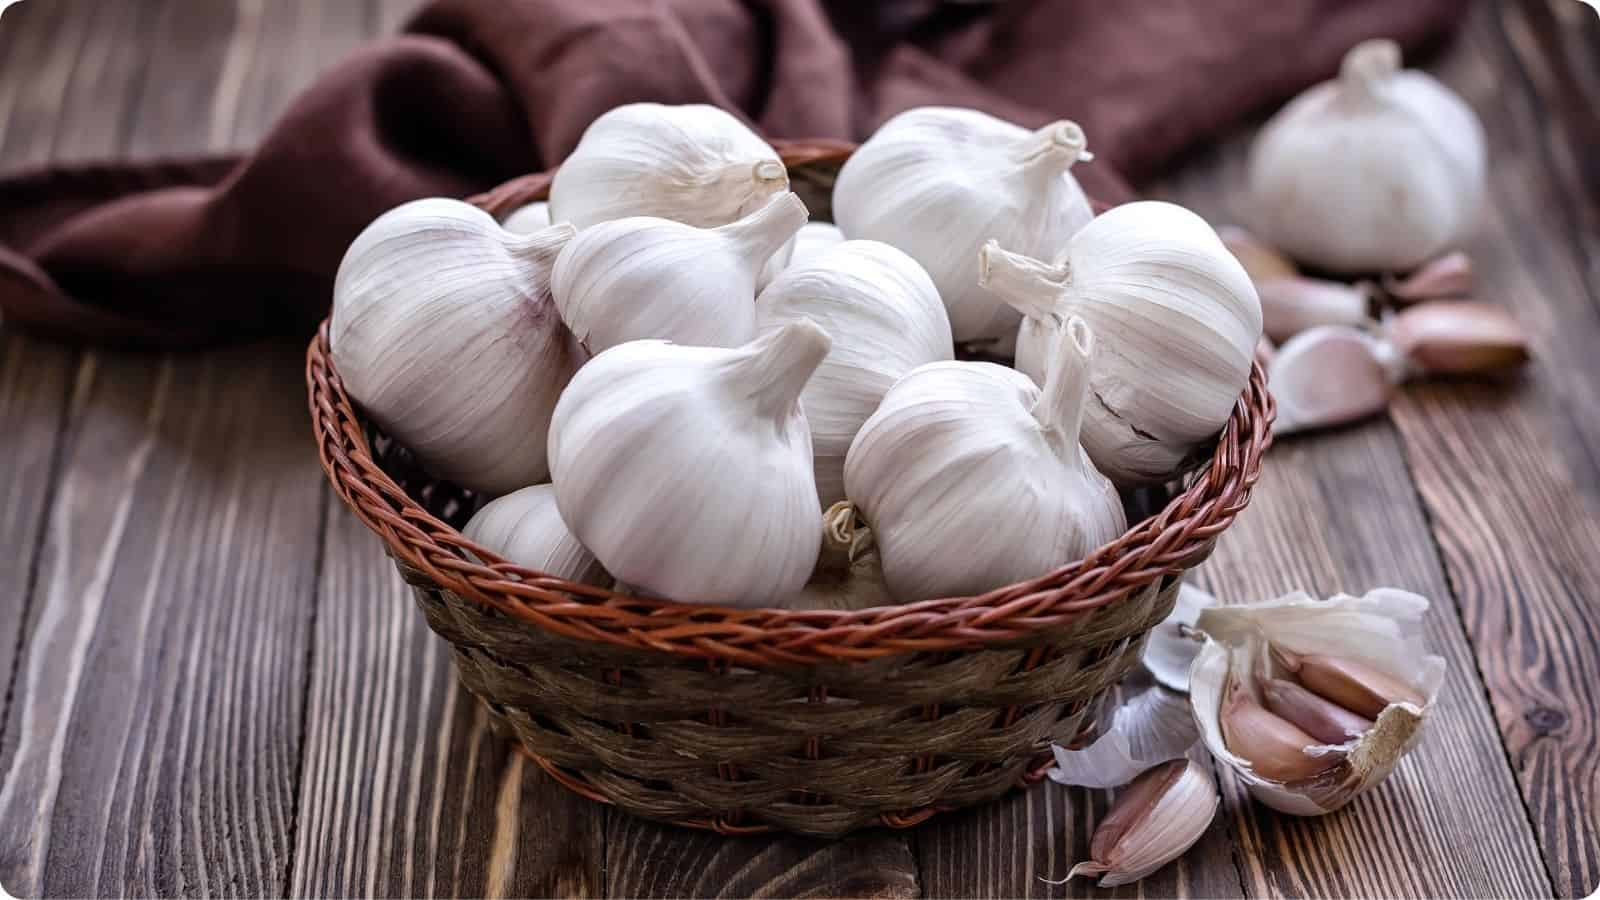 fresh garlic in a basket display on a wooden table.